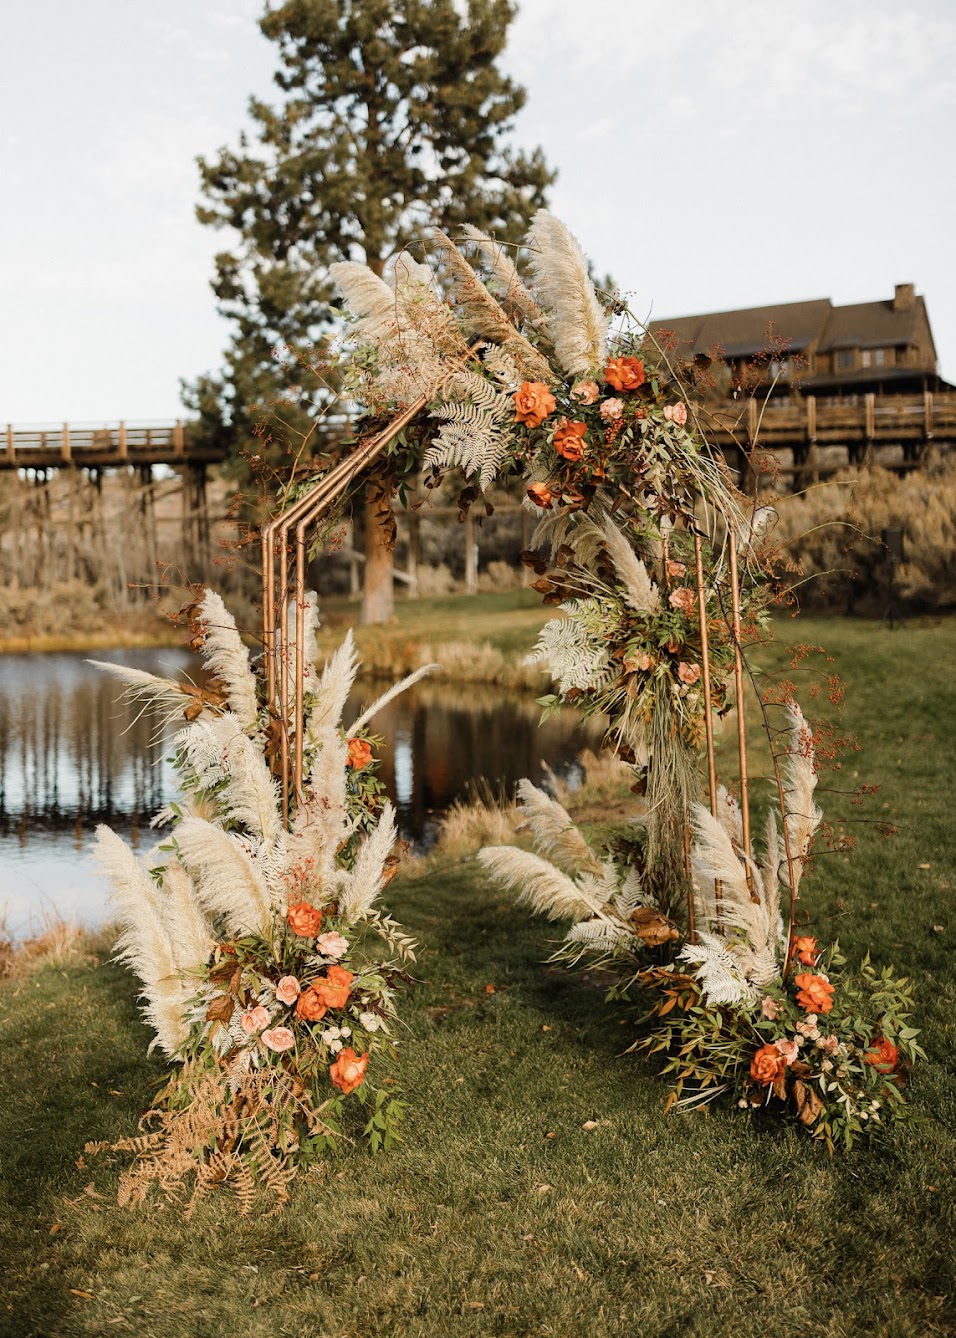 brass arbor adorned with wispy pampas grass, dried ferns, and warm florals. Set in front of a small pond, with a rustic bridge and barn in the background.